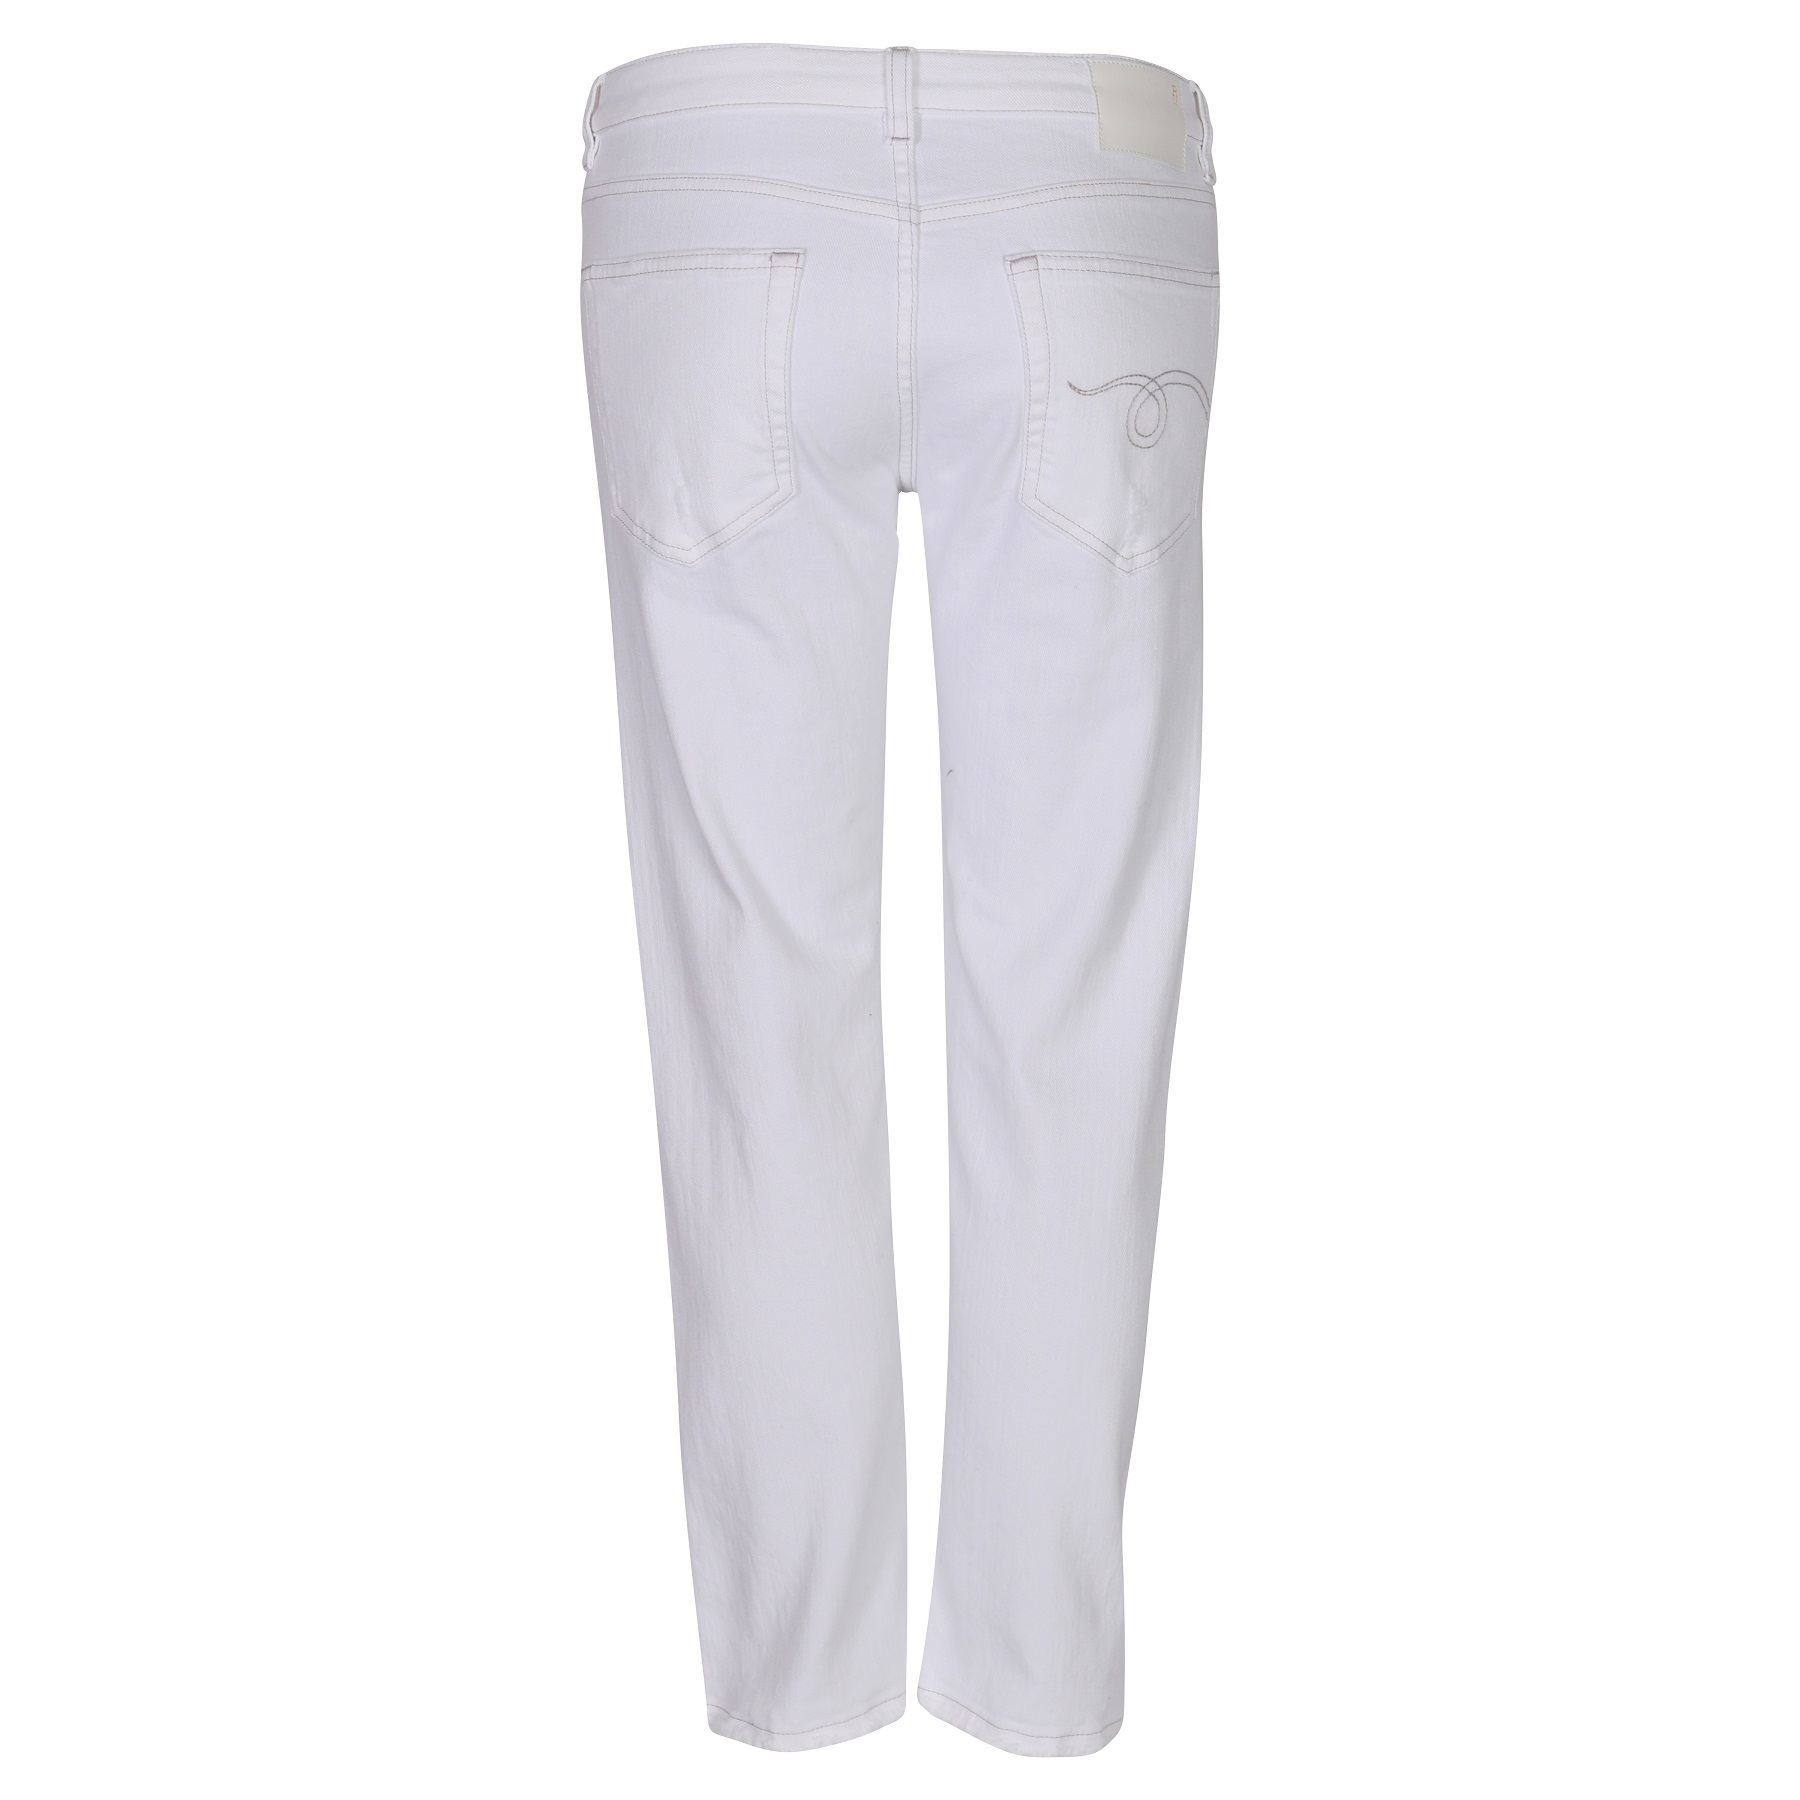 R13 Boy Straight Jeans in Bale White 25